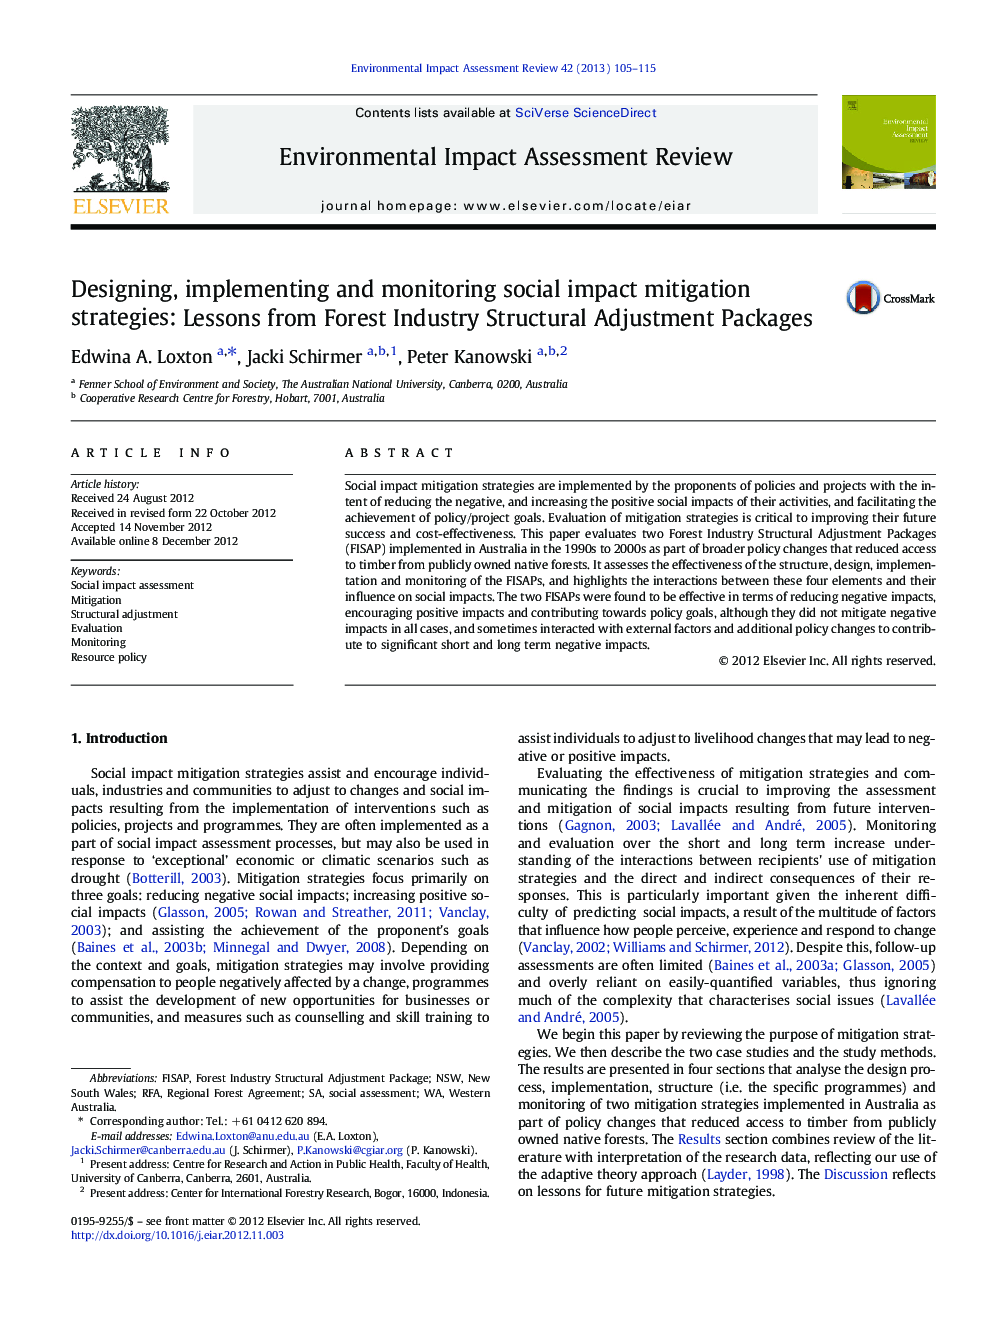 Designing, implementing and monitoring social impact mitigation strategies: Lessons from Forest Industry Structural Adjustment Packages